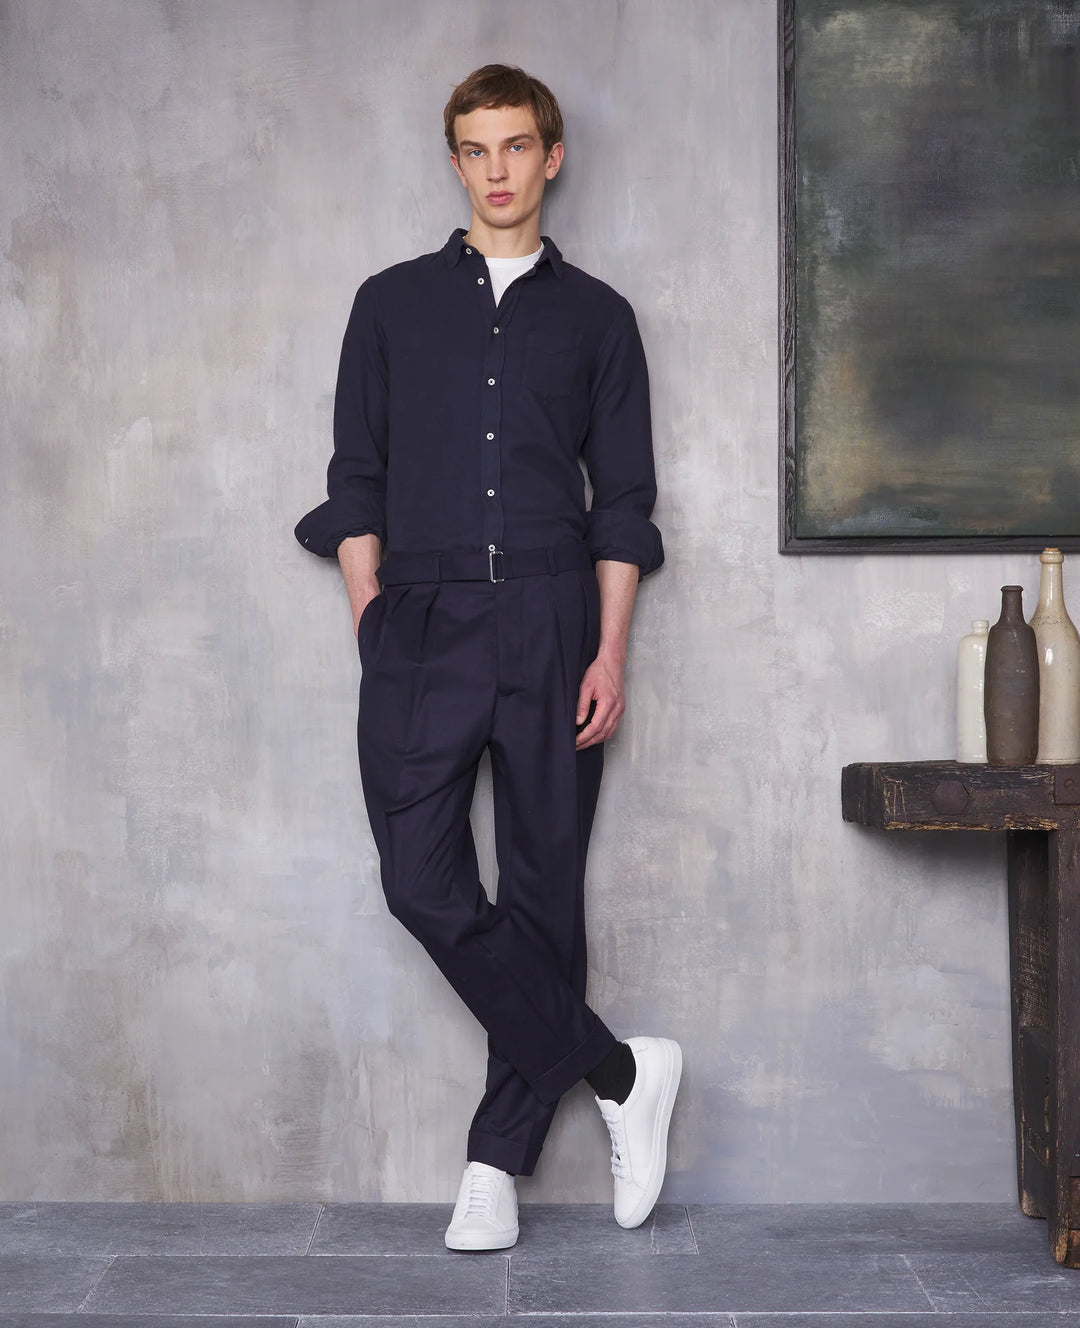 Officine Generale Lipp Shirt in Navy Brushed Cotton